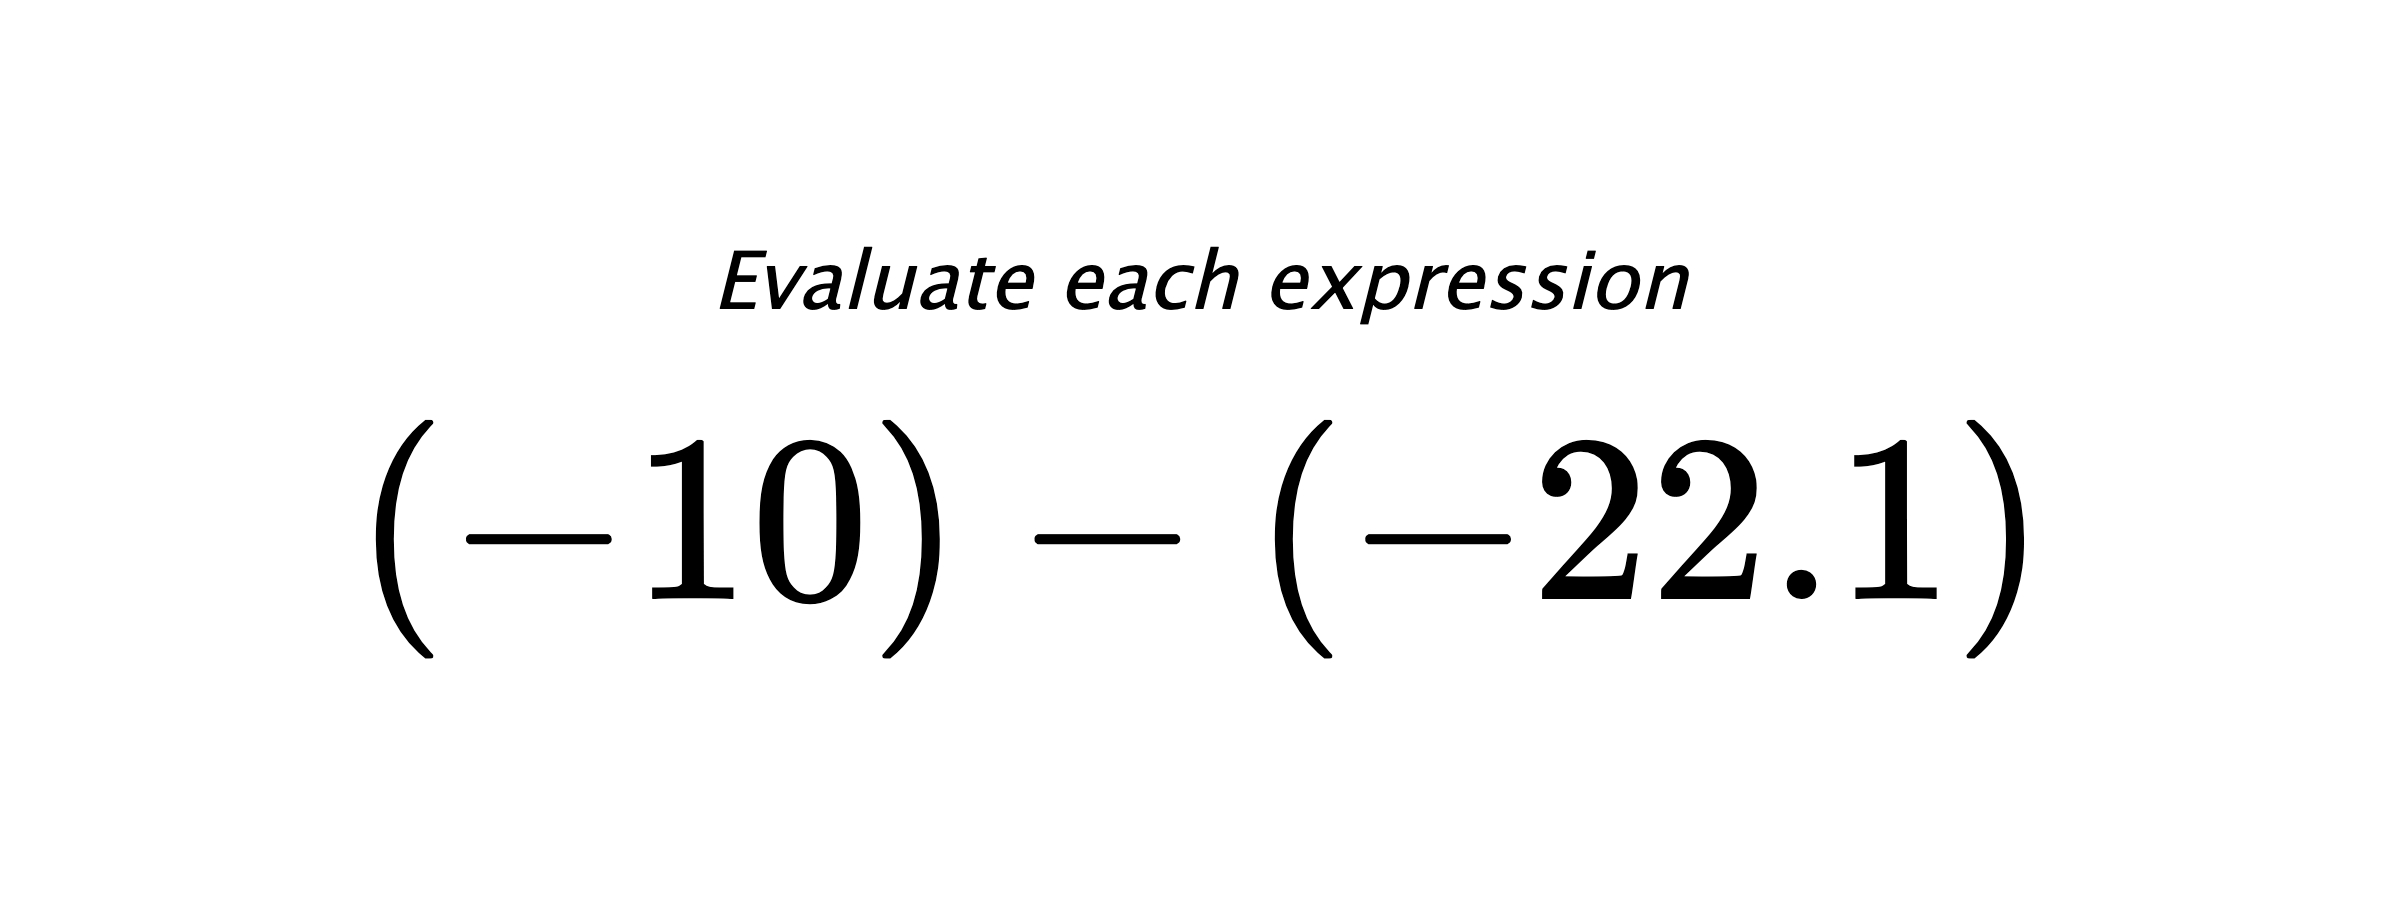 Evaluate each expression $ (-10)-(-22.1) $